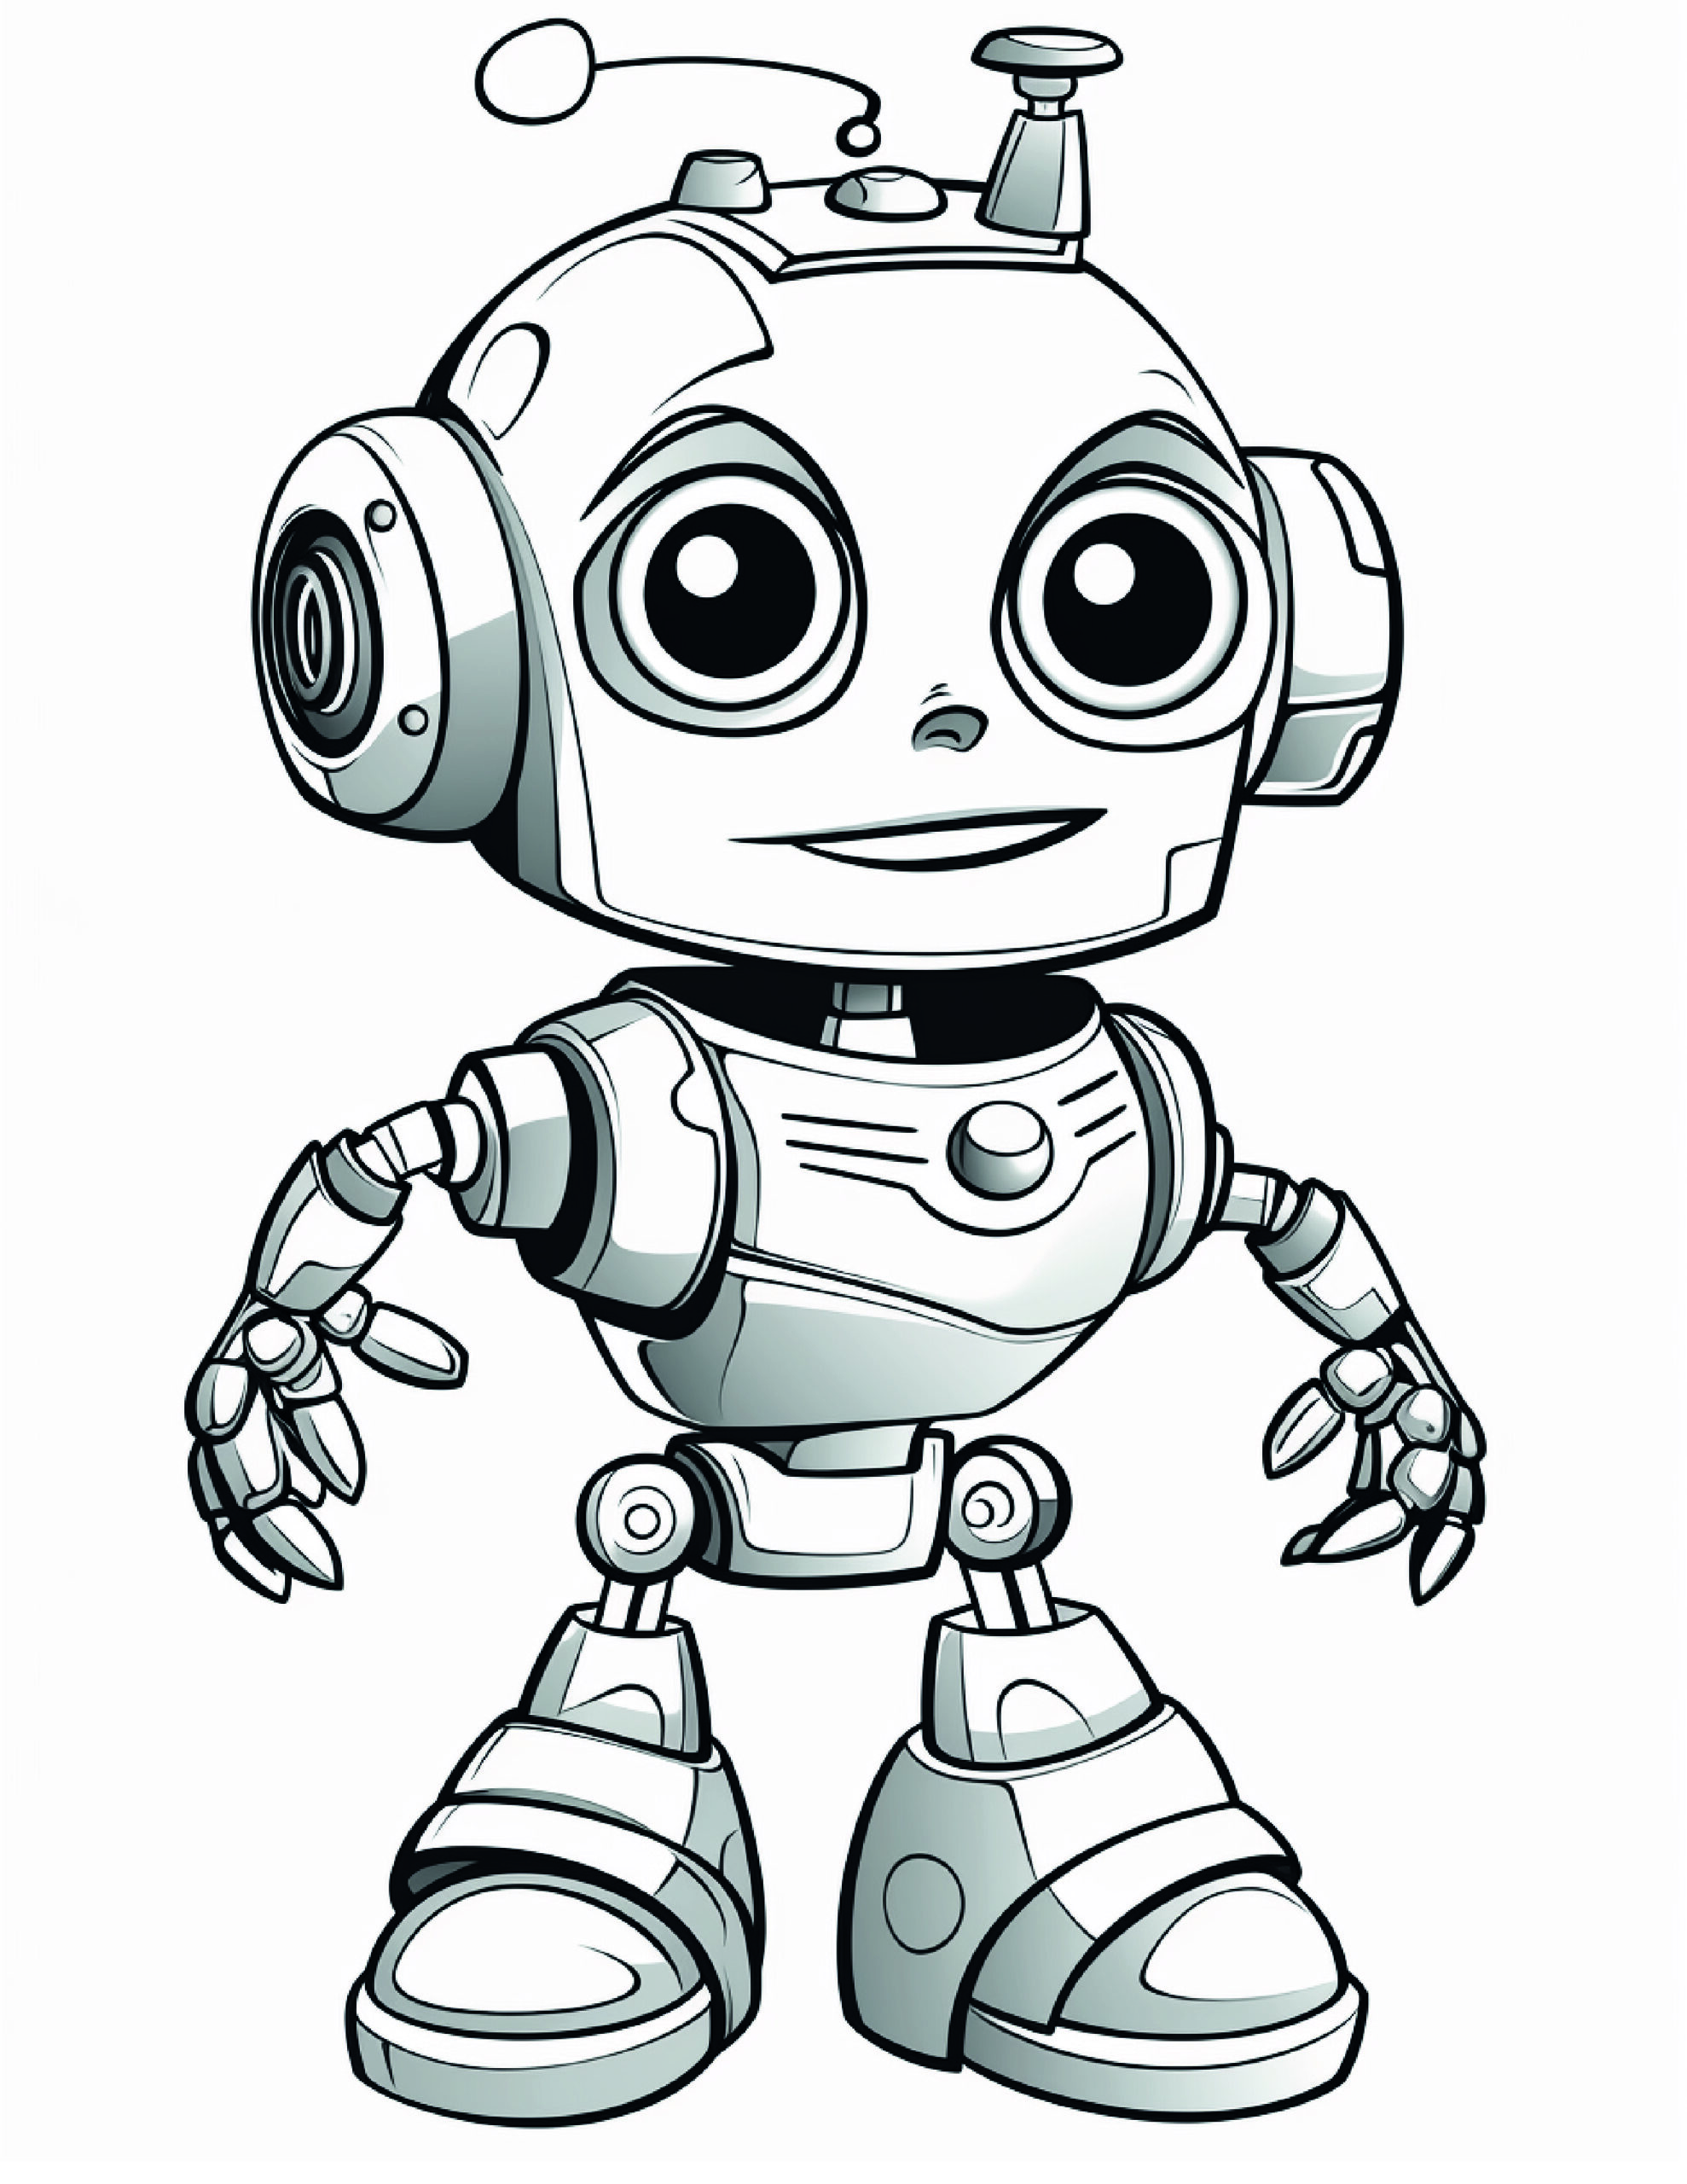 Robot Coloring Page 8 - A line drawing of a fun robot. 